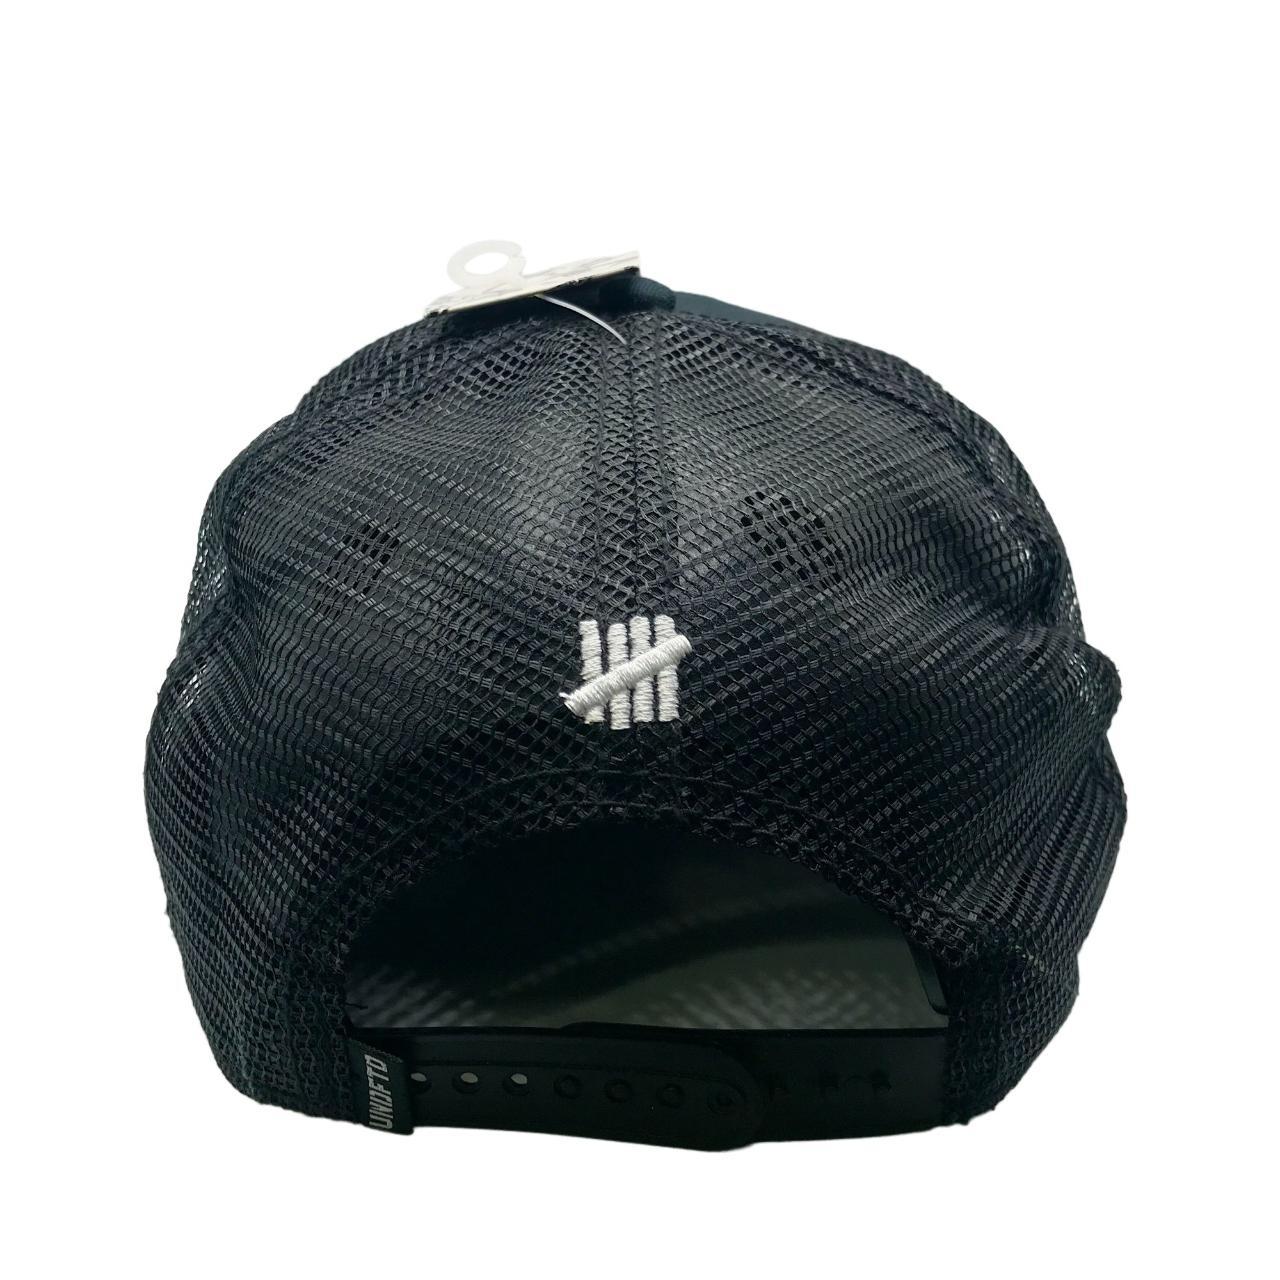 Product Image 3 - Vintage Undefeated Trucker Cap Hat